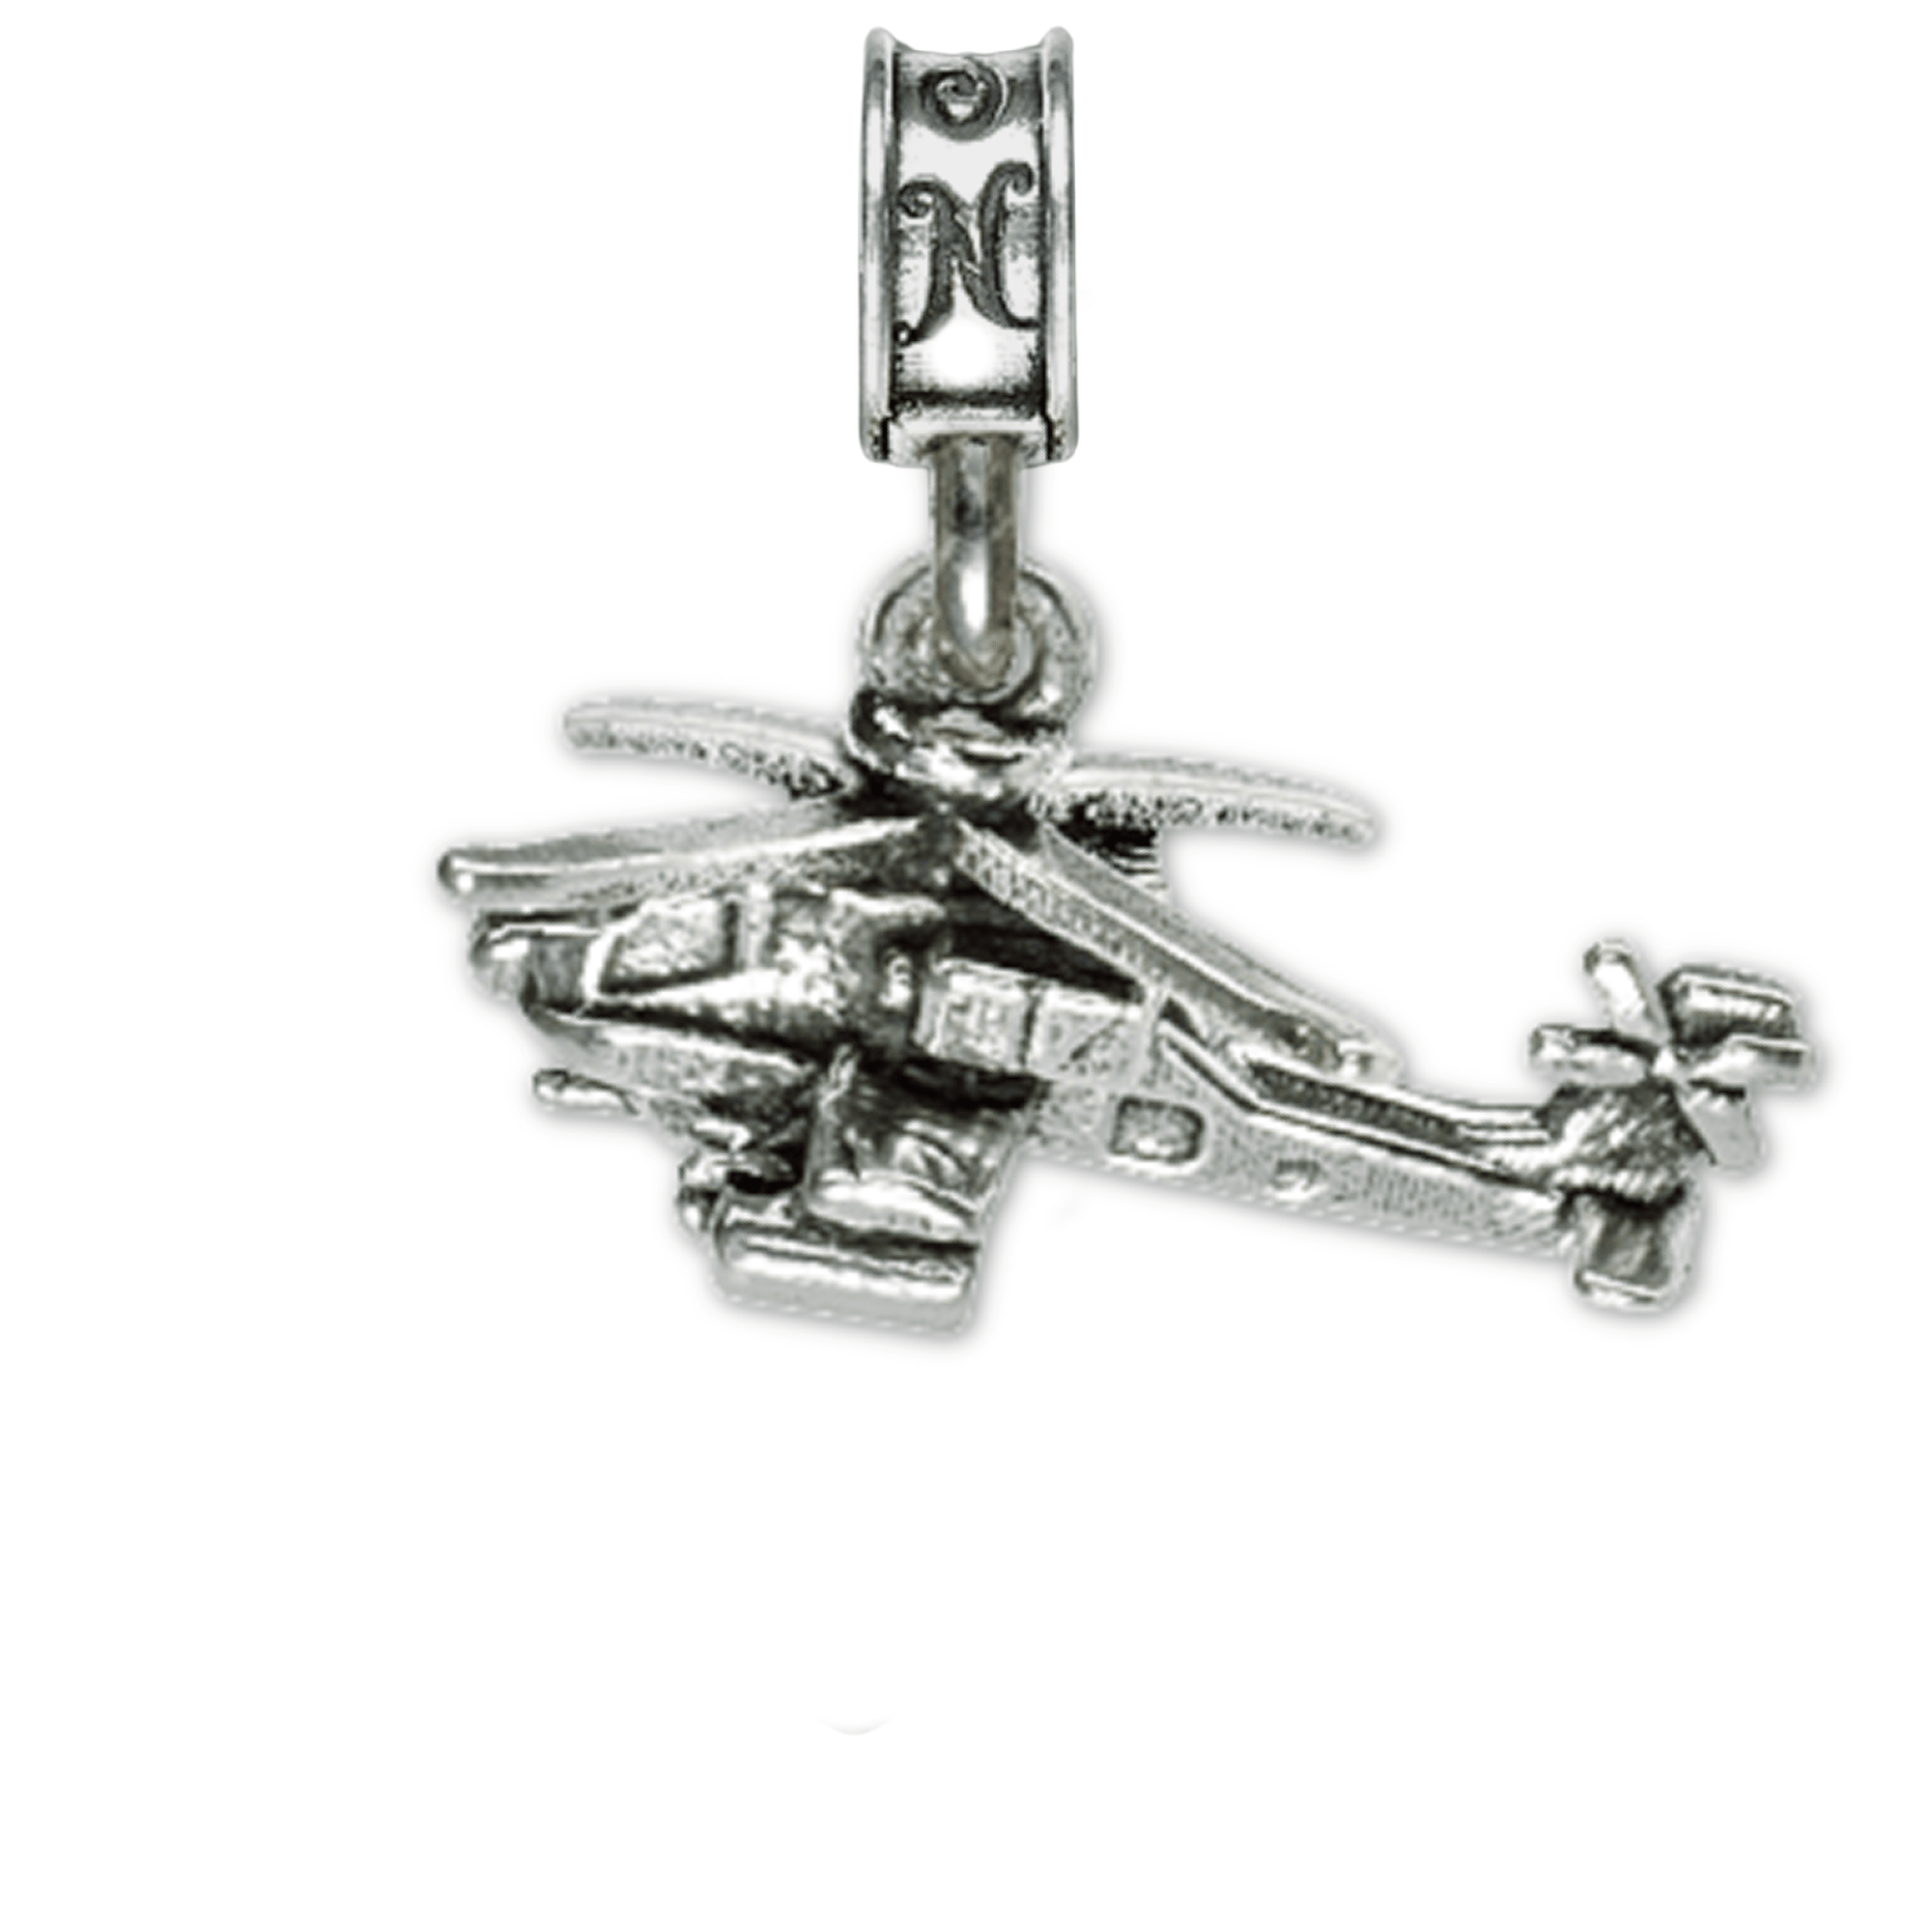 Military Jewelry, Military Charms, Military Gifts, Military Aviation, Apache Helicopter Charm